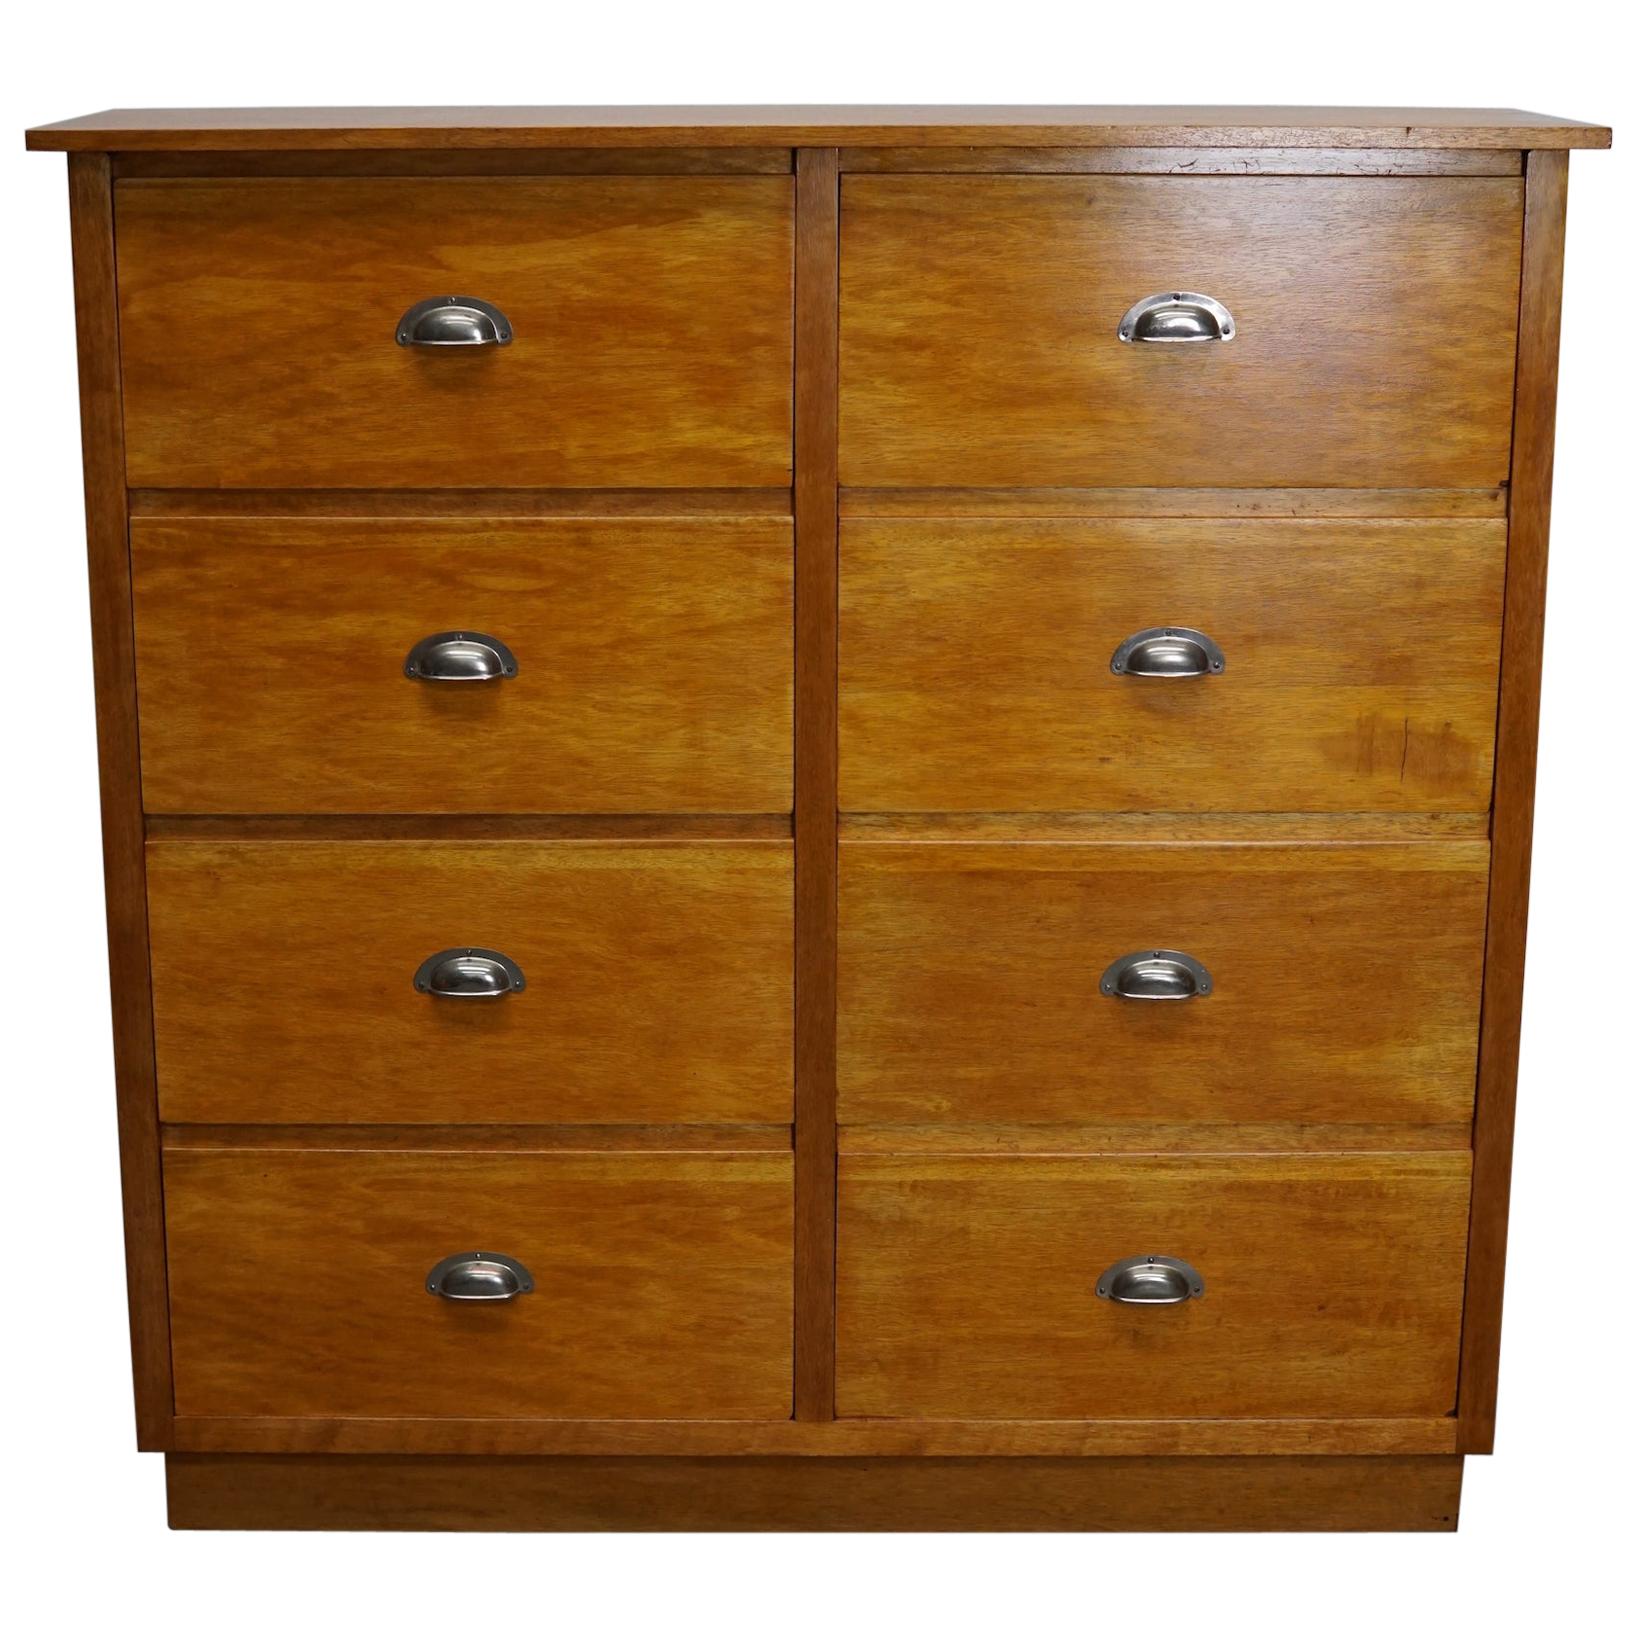 German Oak Apothecary Cabinet, Mid-20th Century